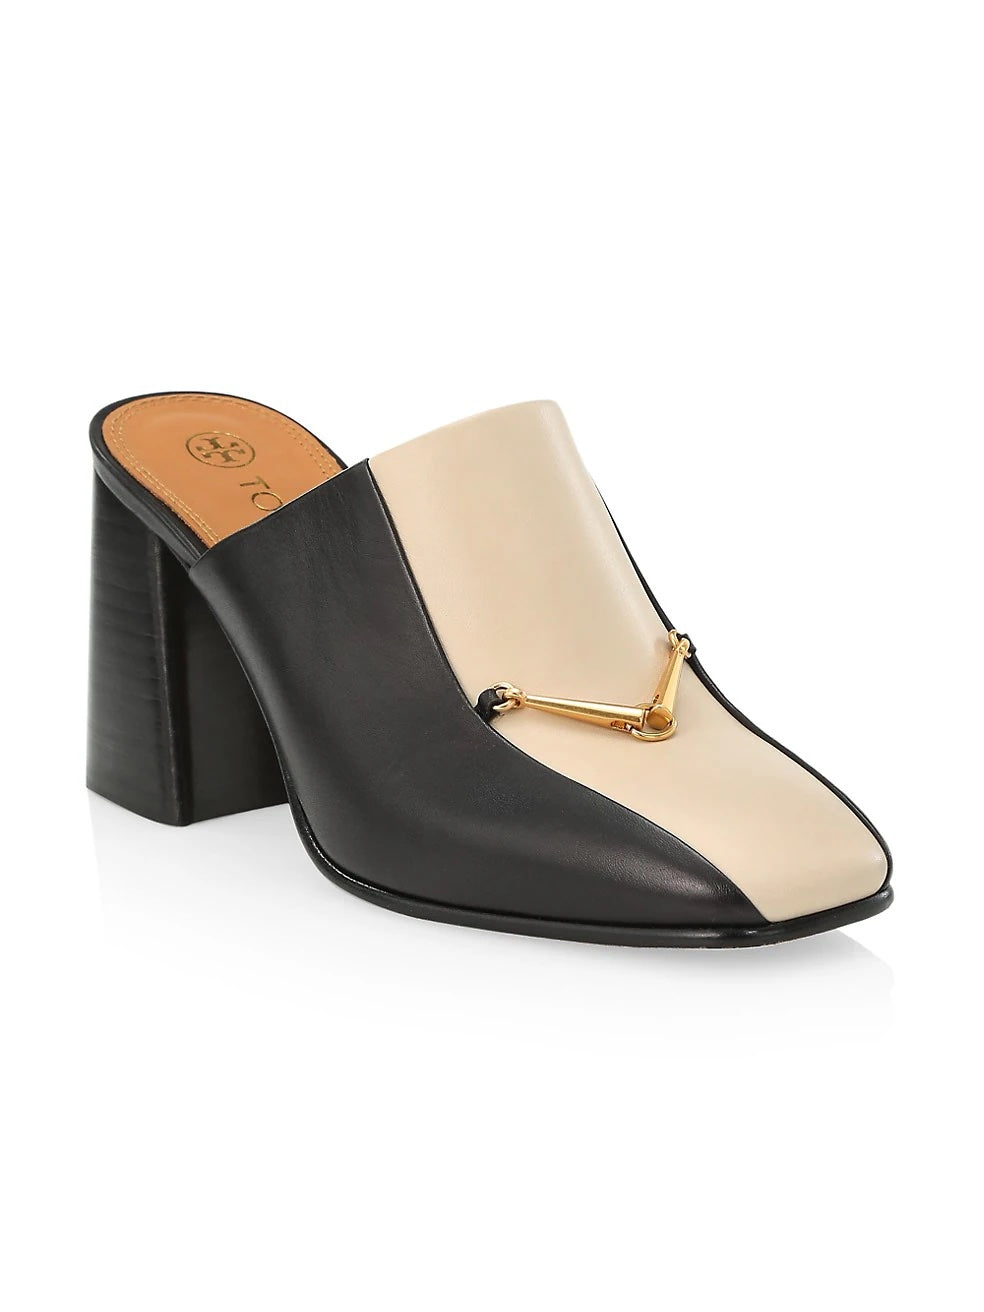 TORY BURCH EQUESTRIAN LINK SQUARE TOE COLORBLOCK LEATHER MULES – Caroline's  Fashion Luxuries